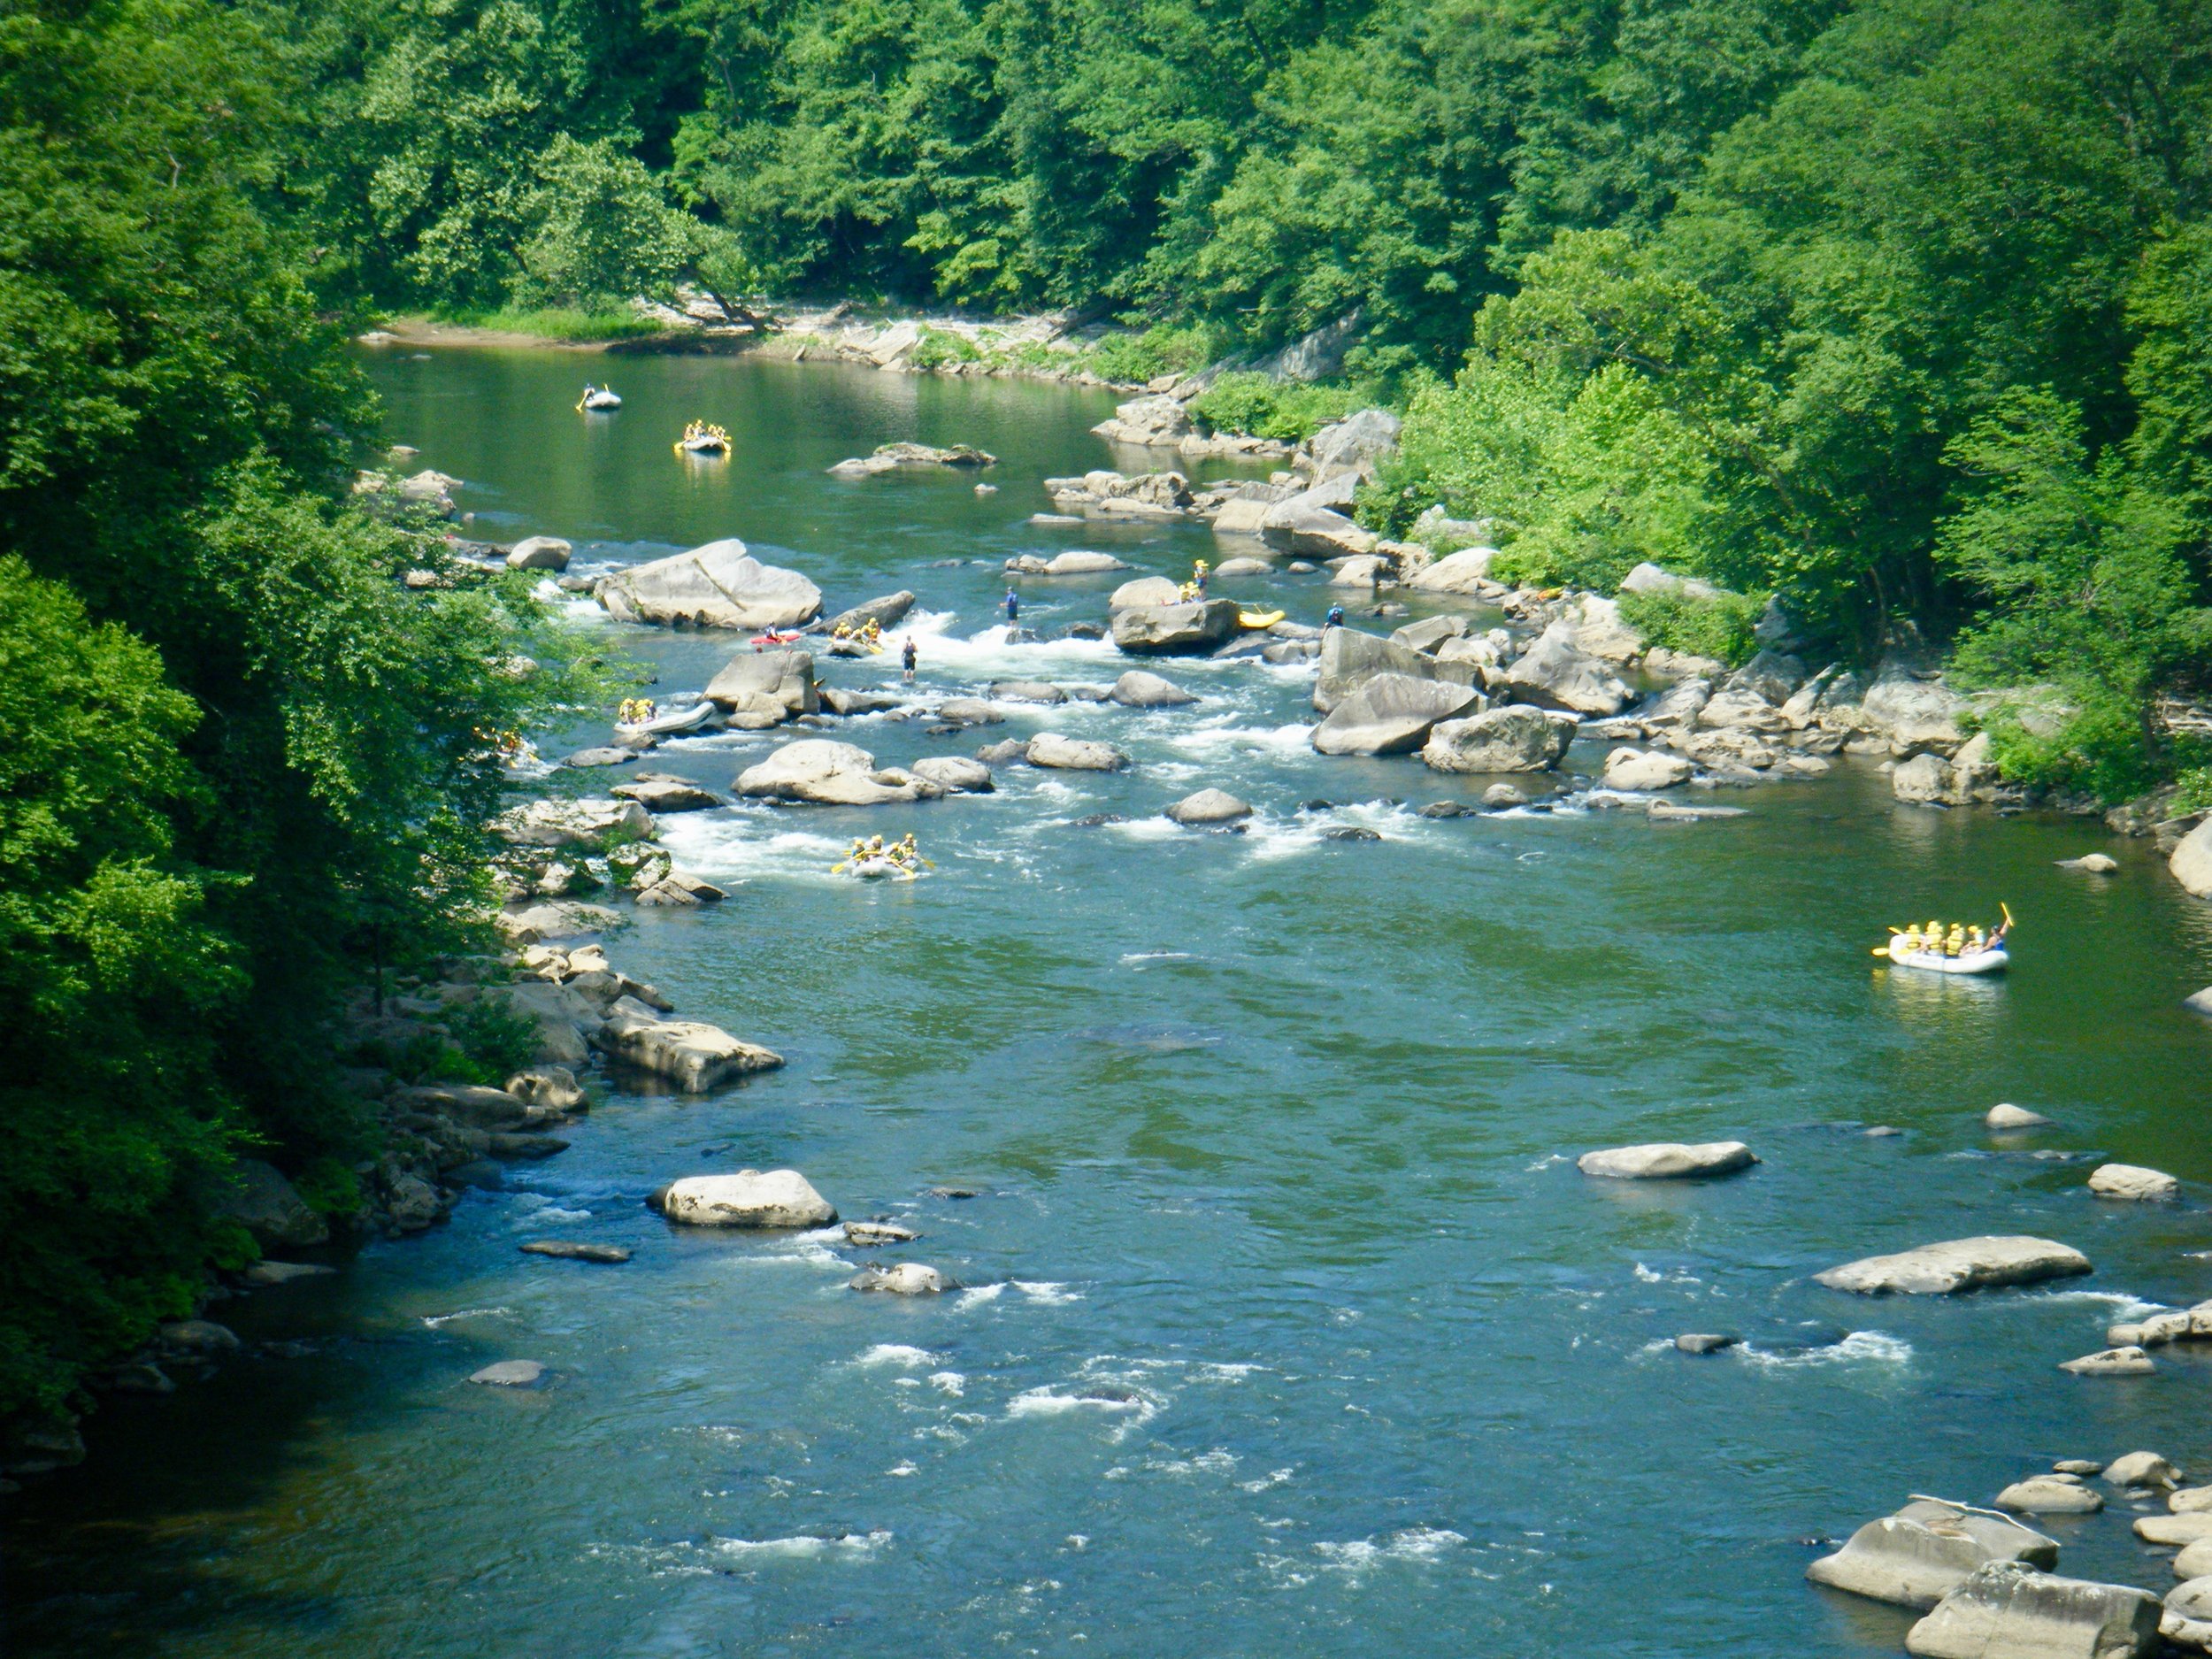 Rafters in the Youghiogheny River